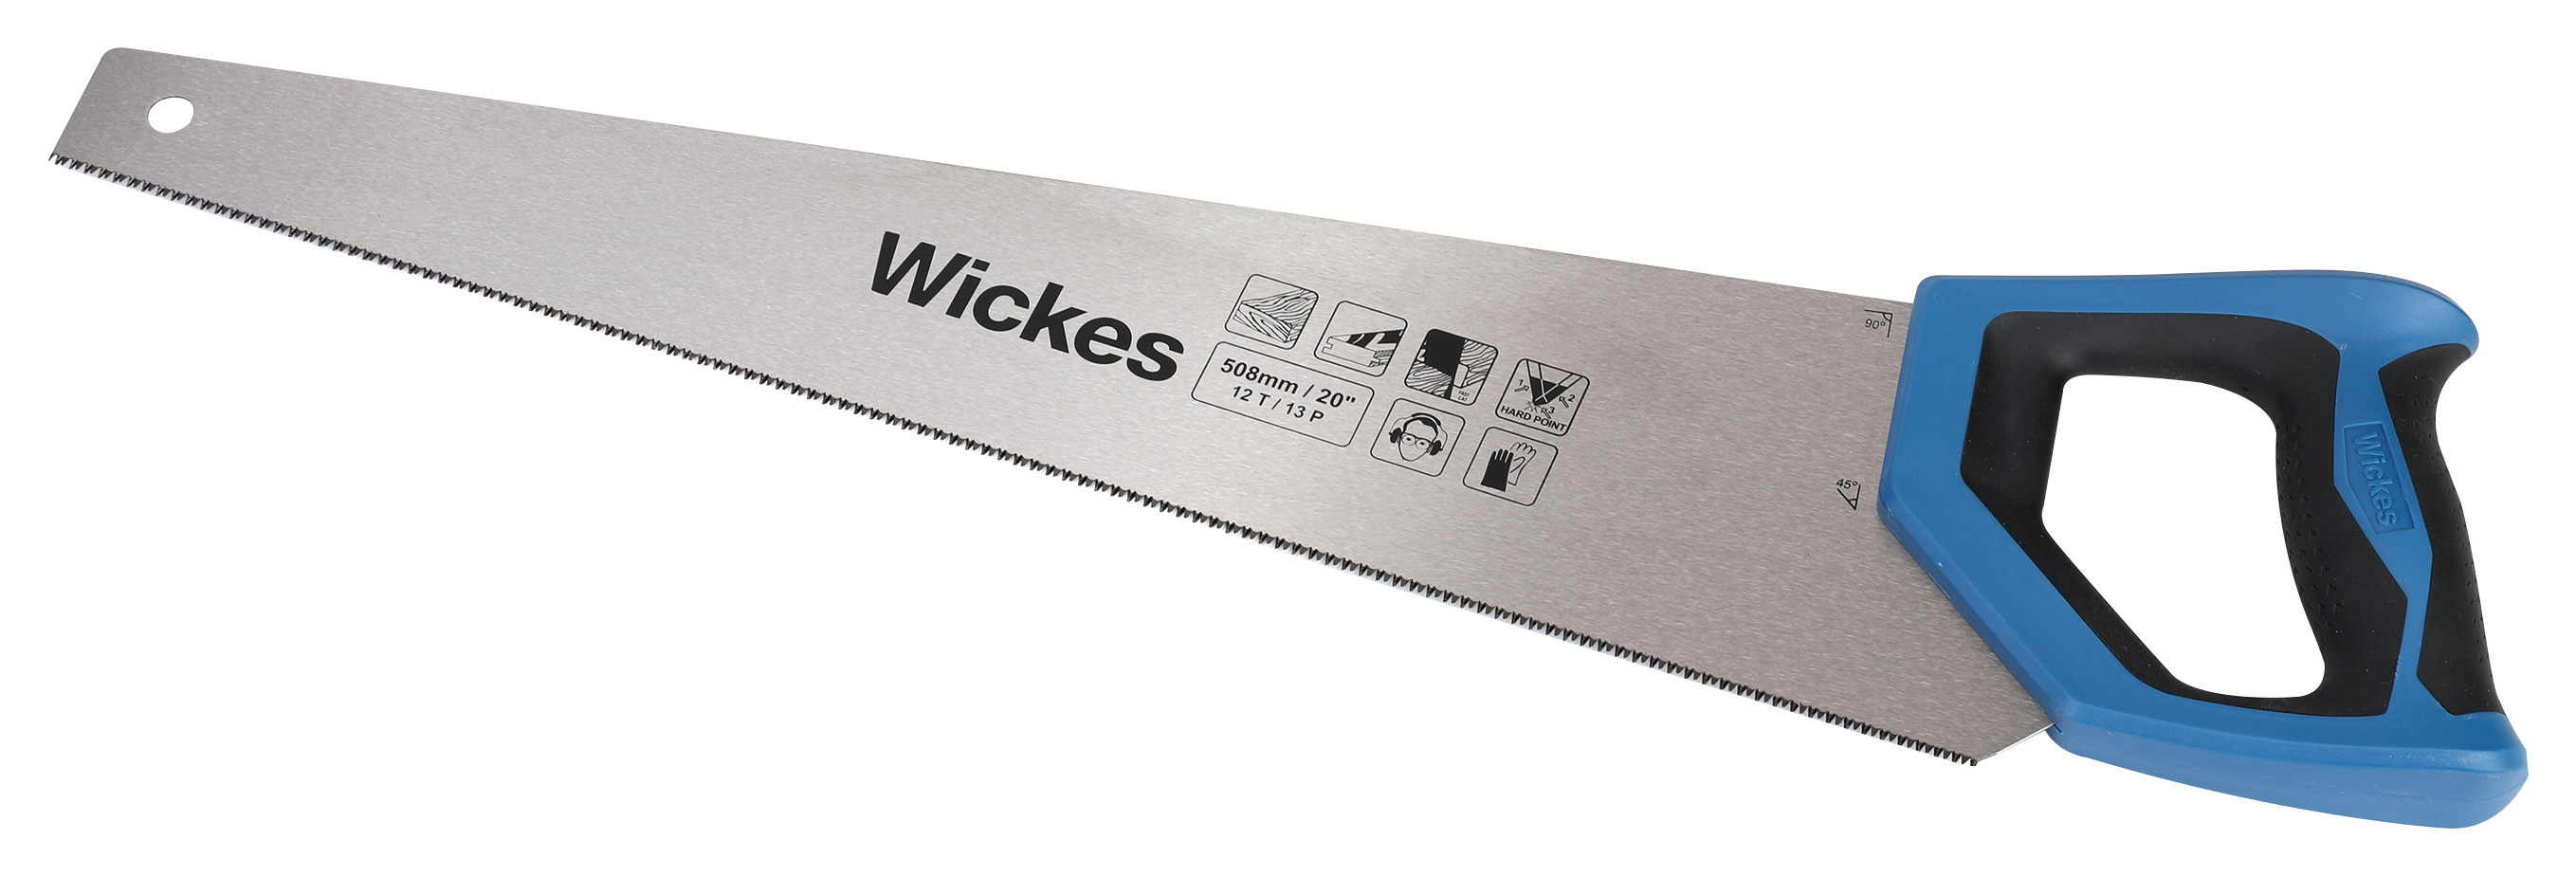 Image of Wickes Fine Cut Panel Handsaw - 20in